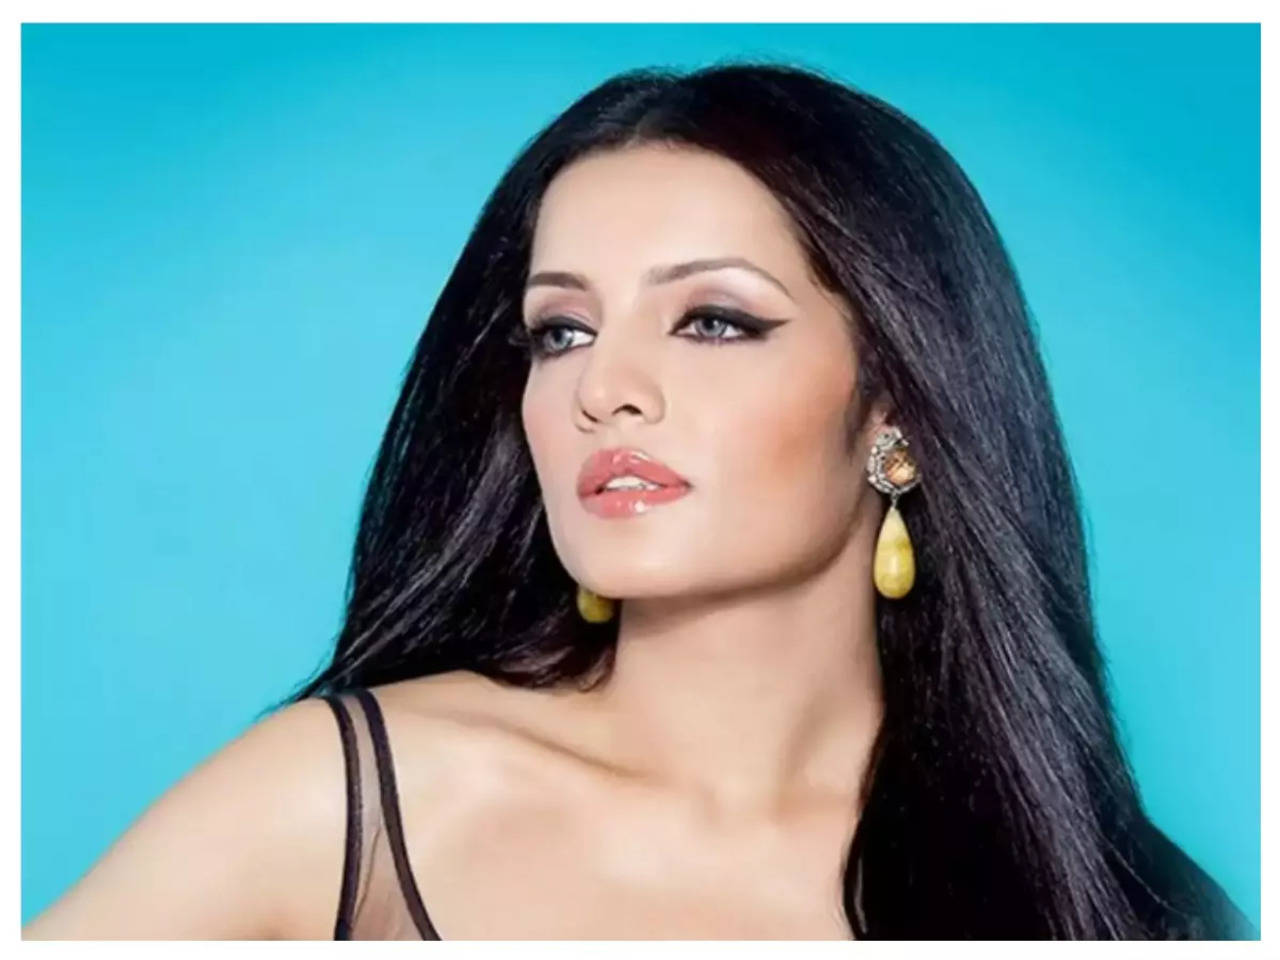 A Twitter user threw shade at Celina Jaitly demeaning her character, the former actor hits back with a powerful response | Hindi Movie News - Times of India